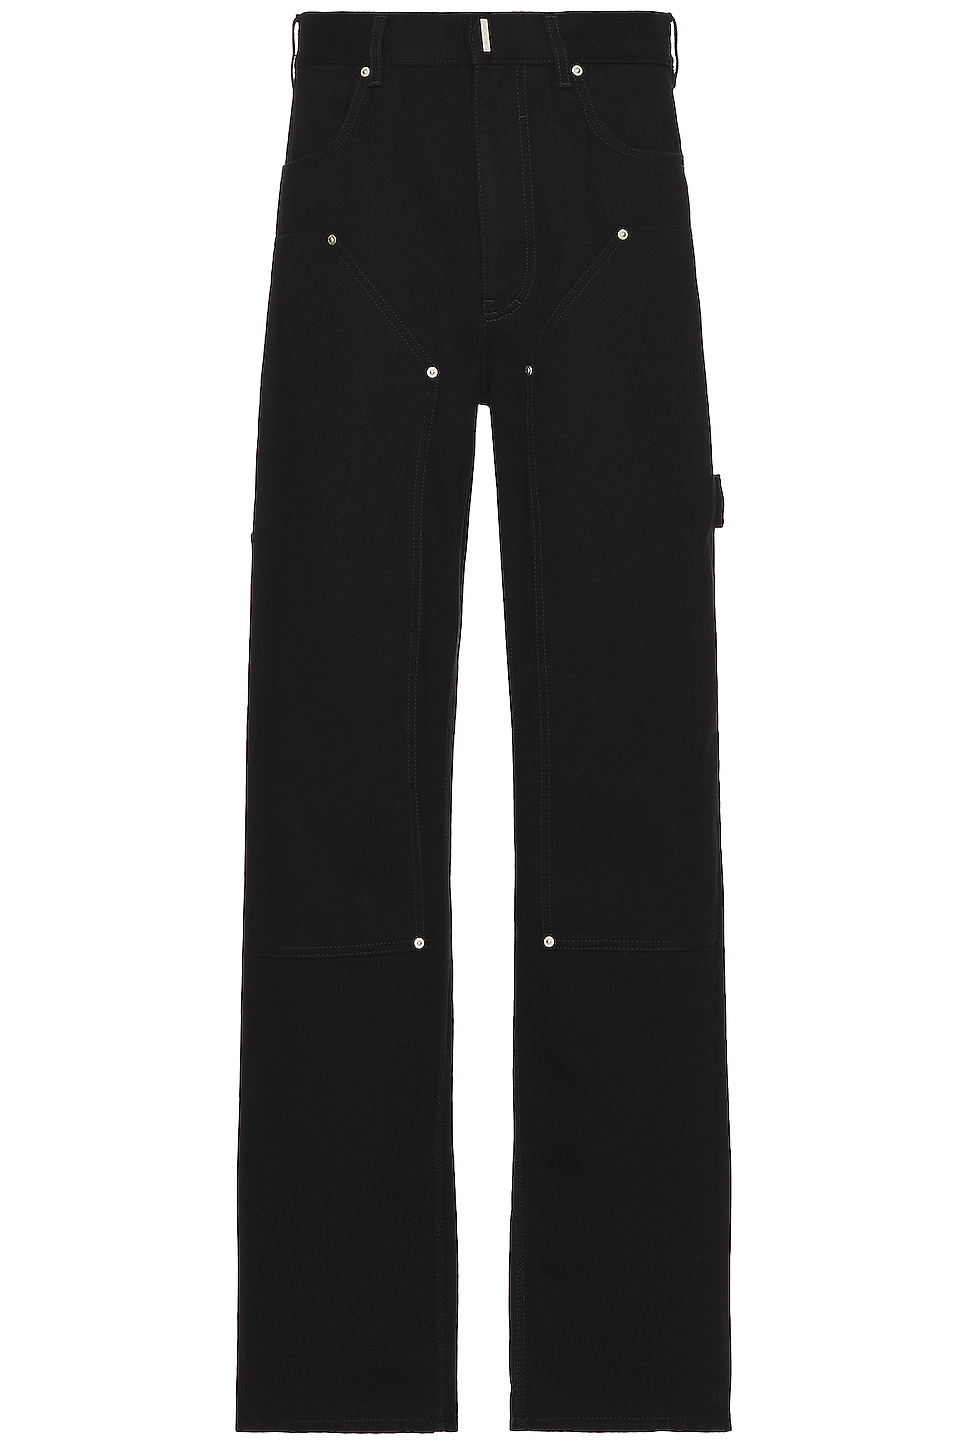 Image 1 of Givenchy Studded Carpenter Pant in Black